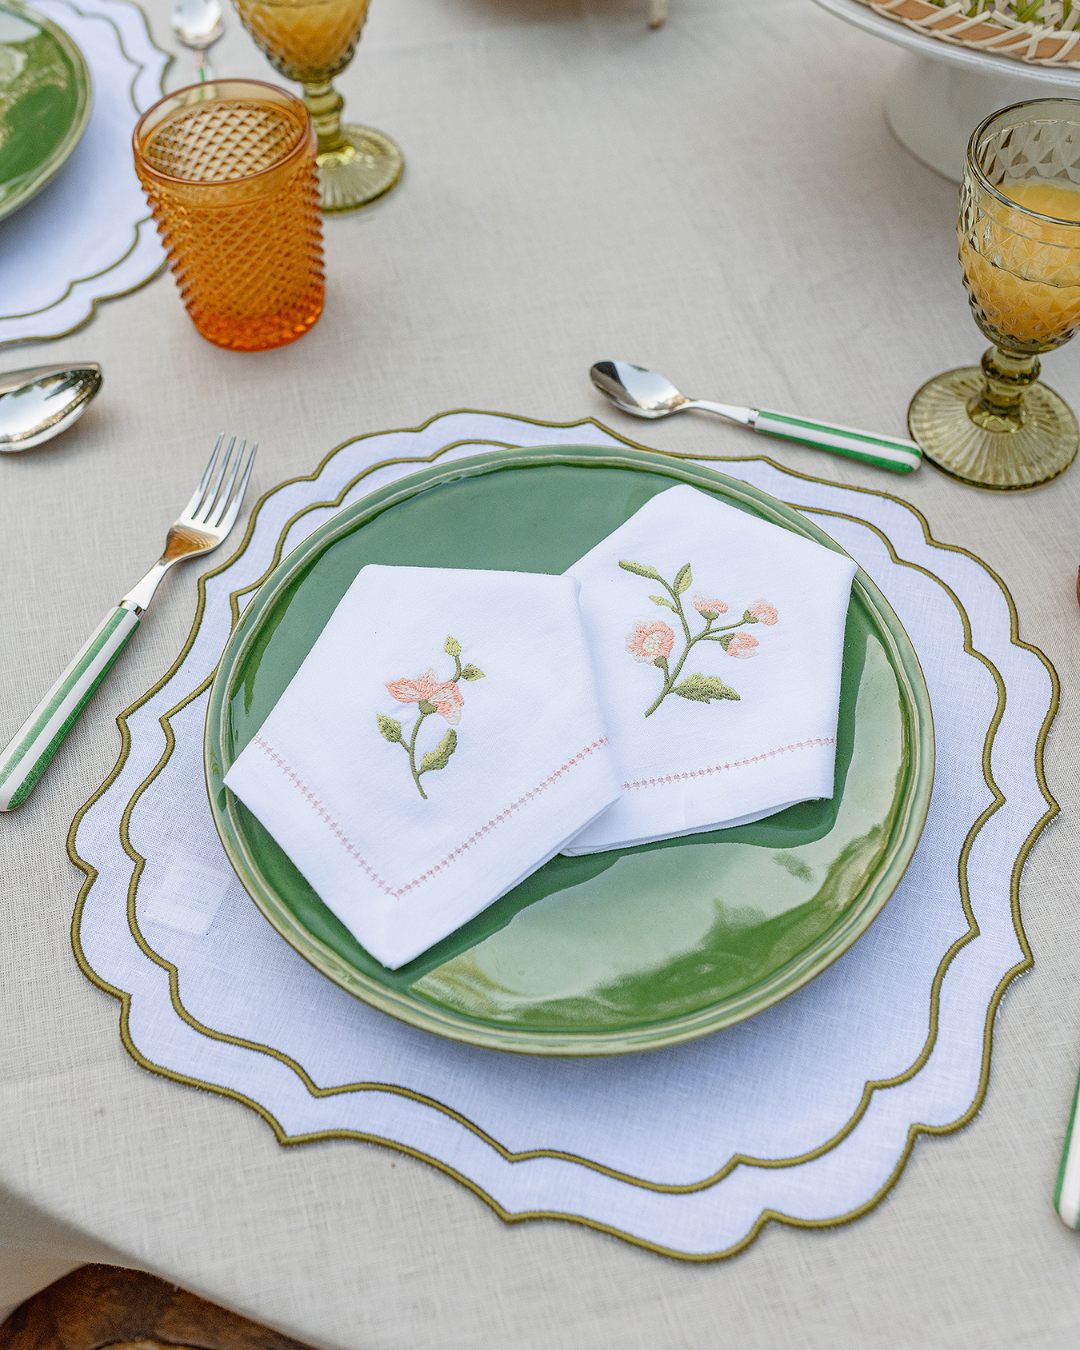 Harmony Basket - Napkins and Placemats